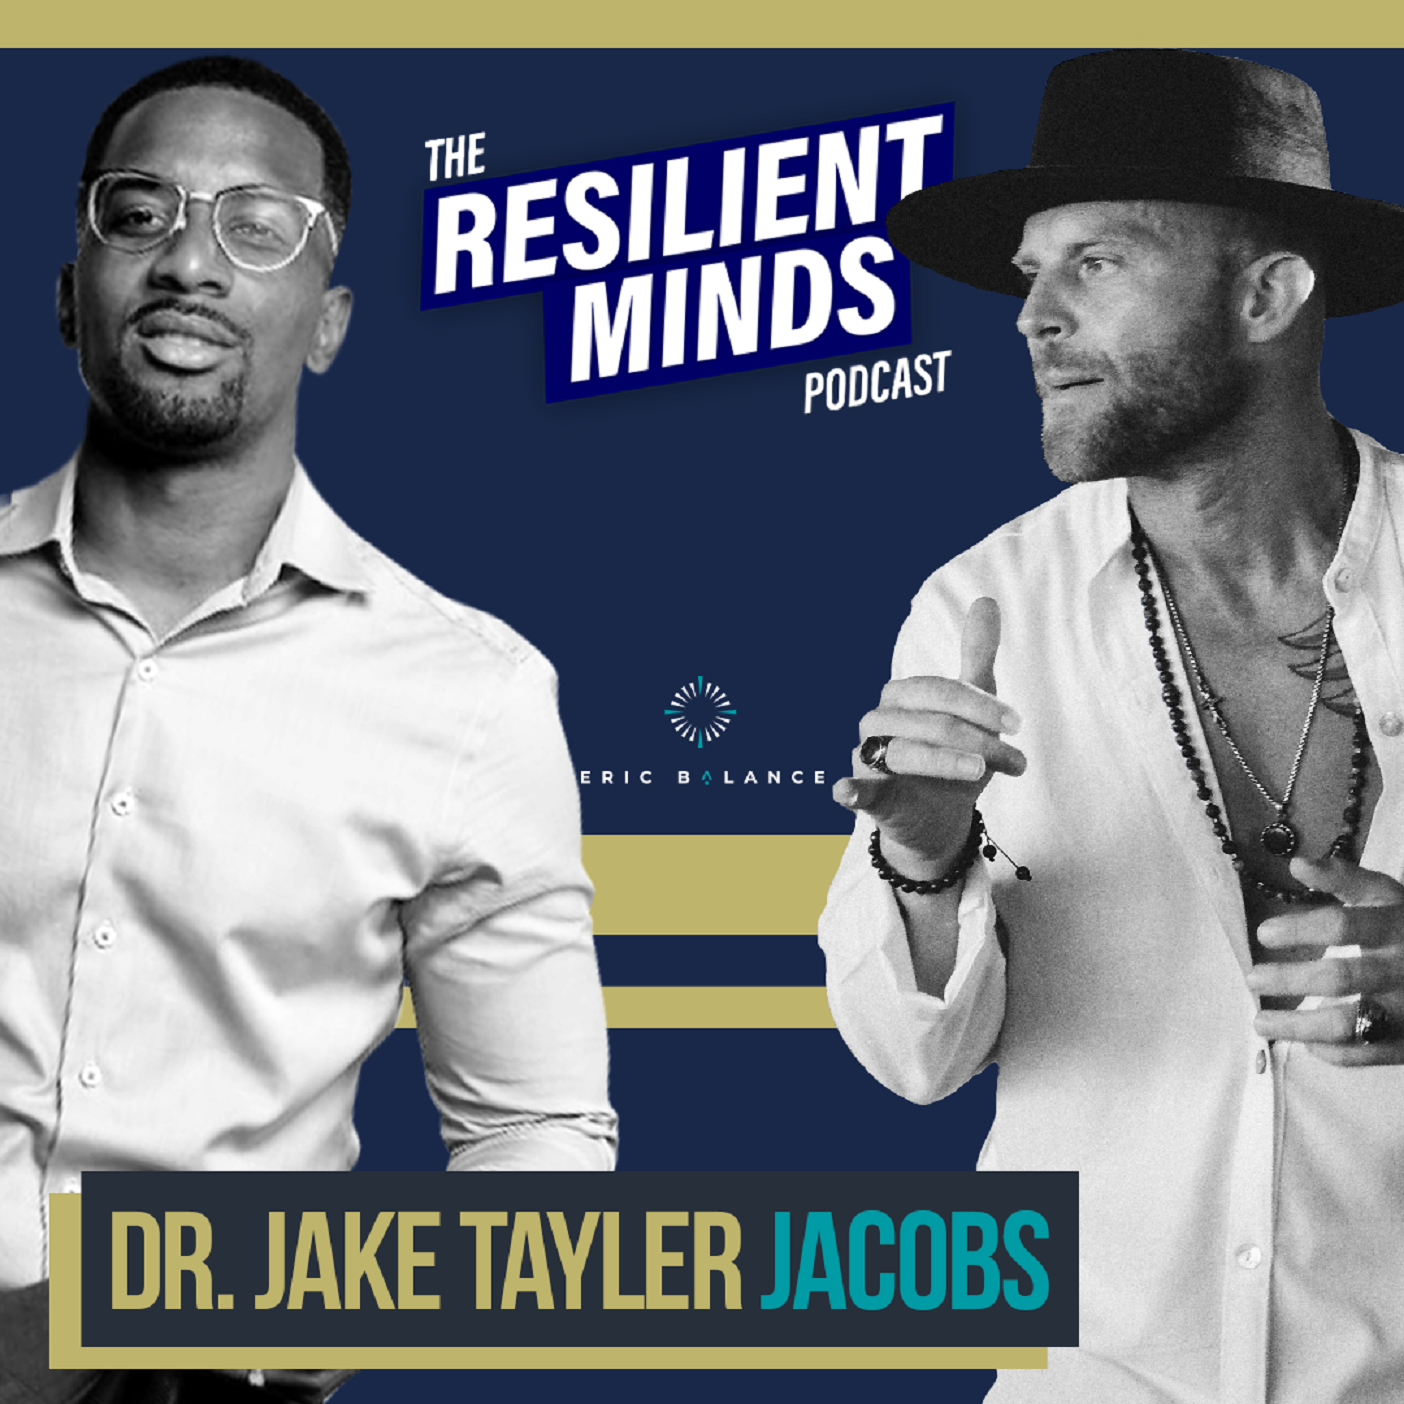 Episode 117 – How to Find Your Path of Faith with Dr. Jake Tayler Jacobs